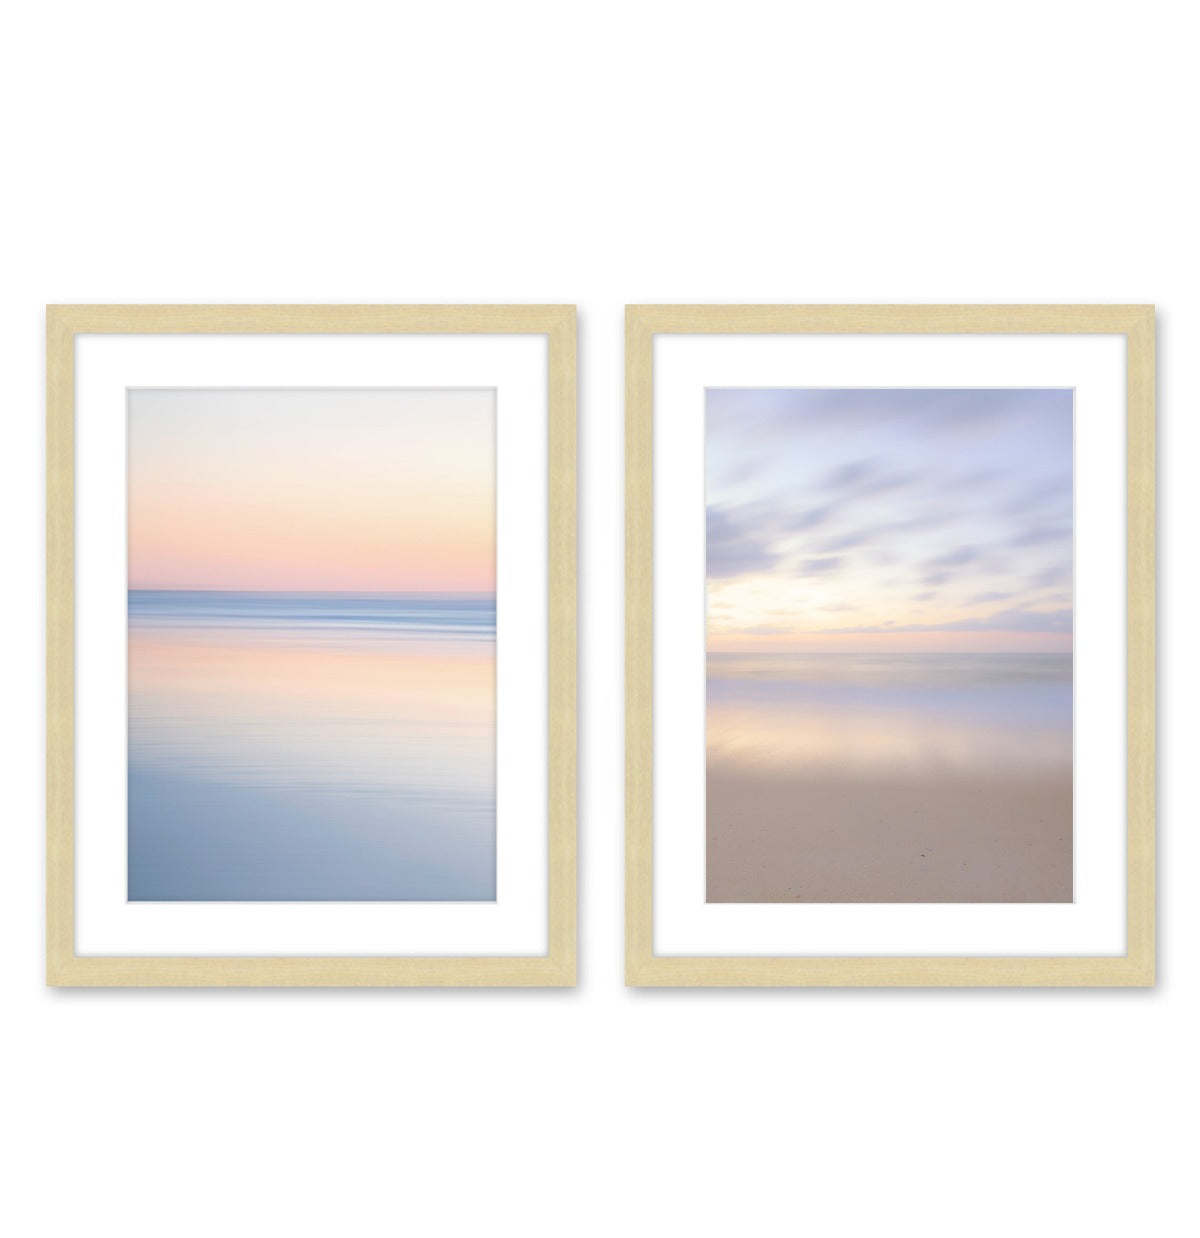  30x40 Frame Natural Wood with White Mat, 32x42 Frame Matted  to 30x40